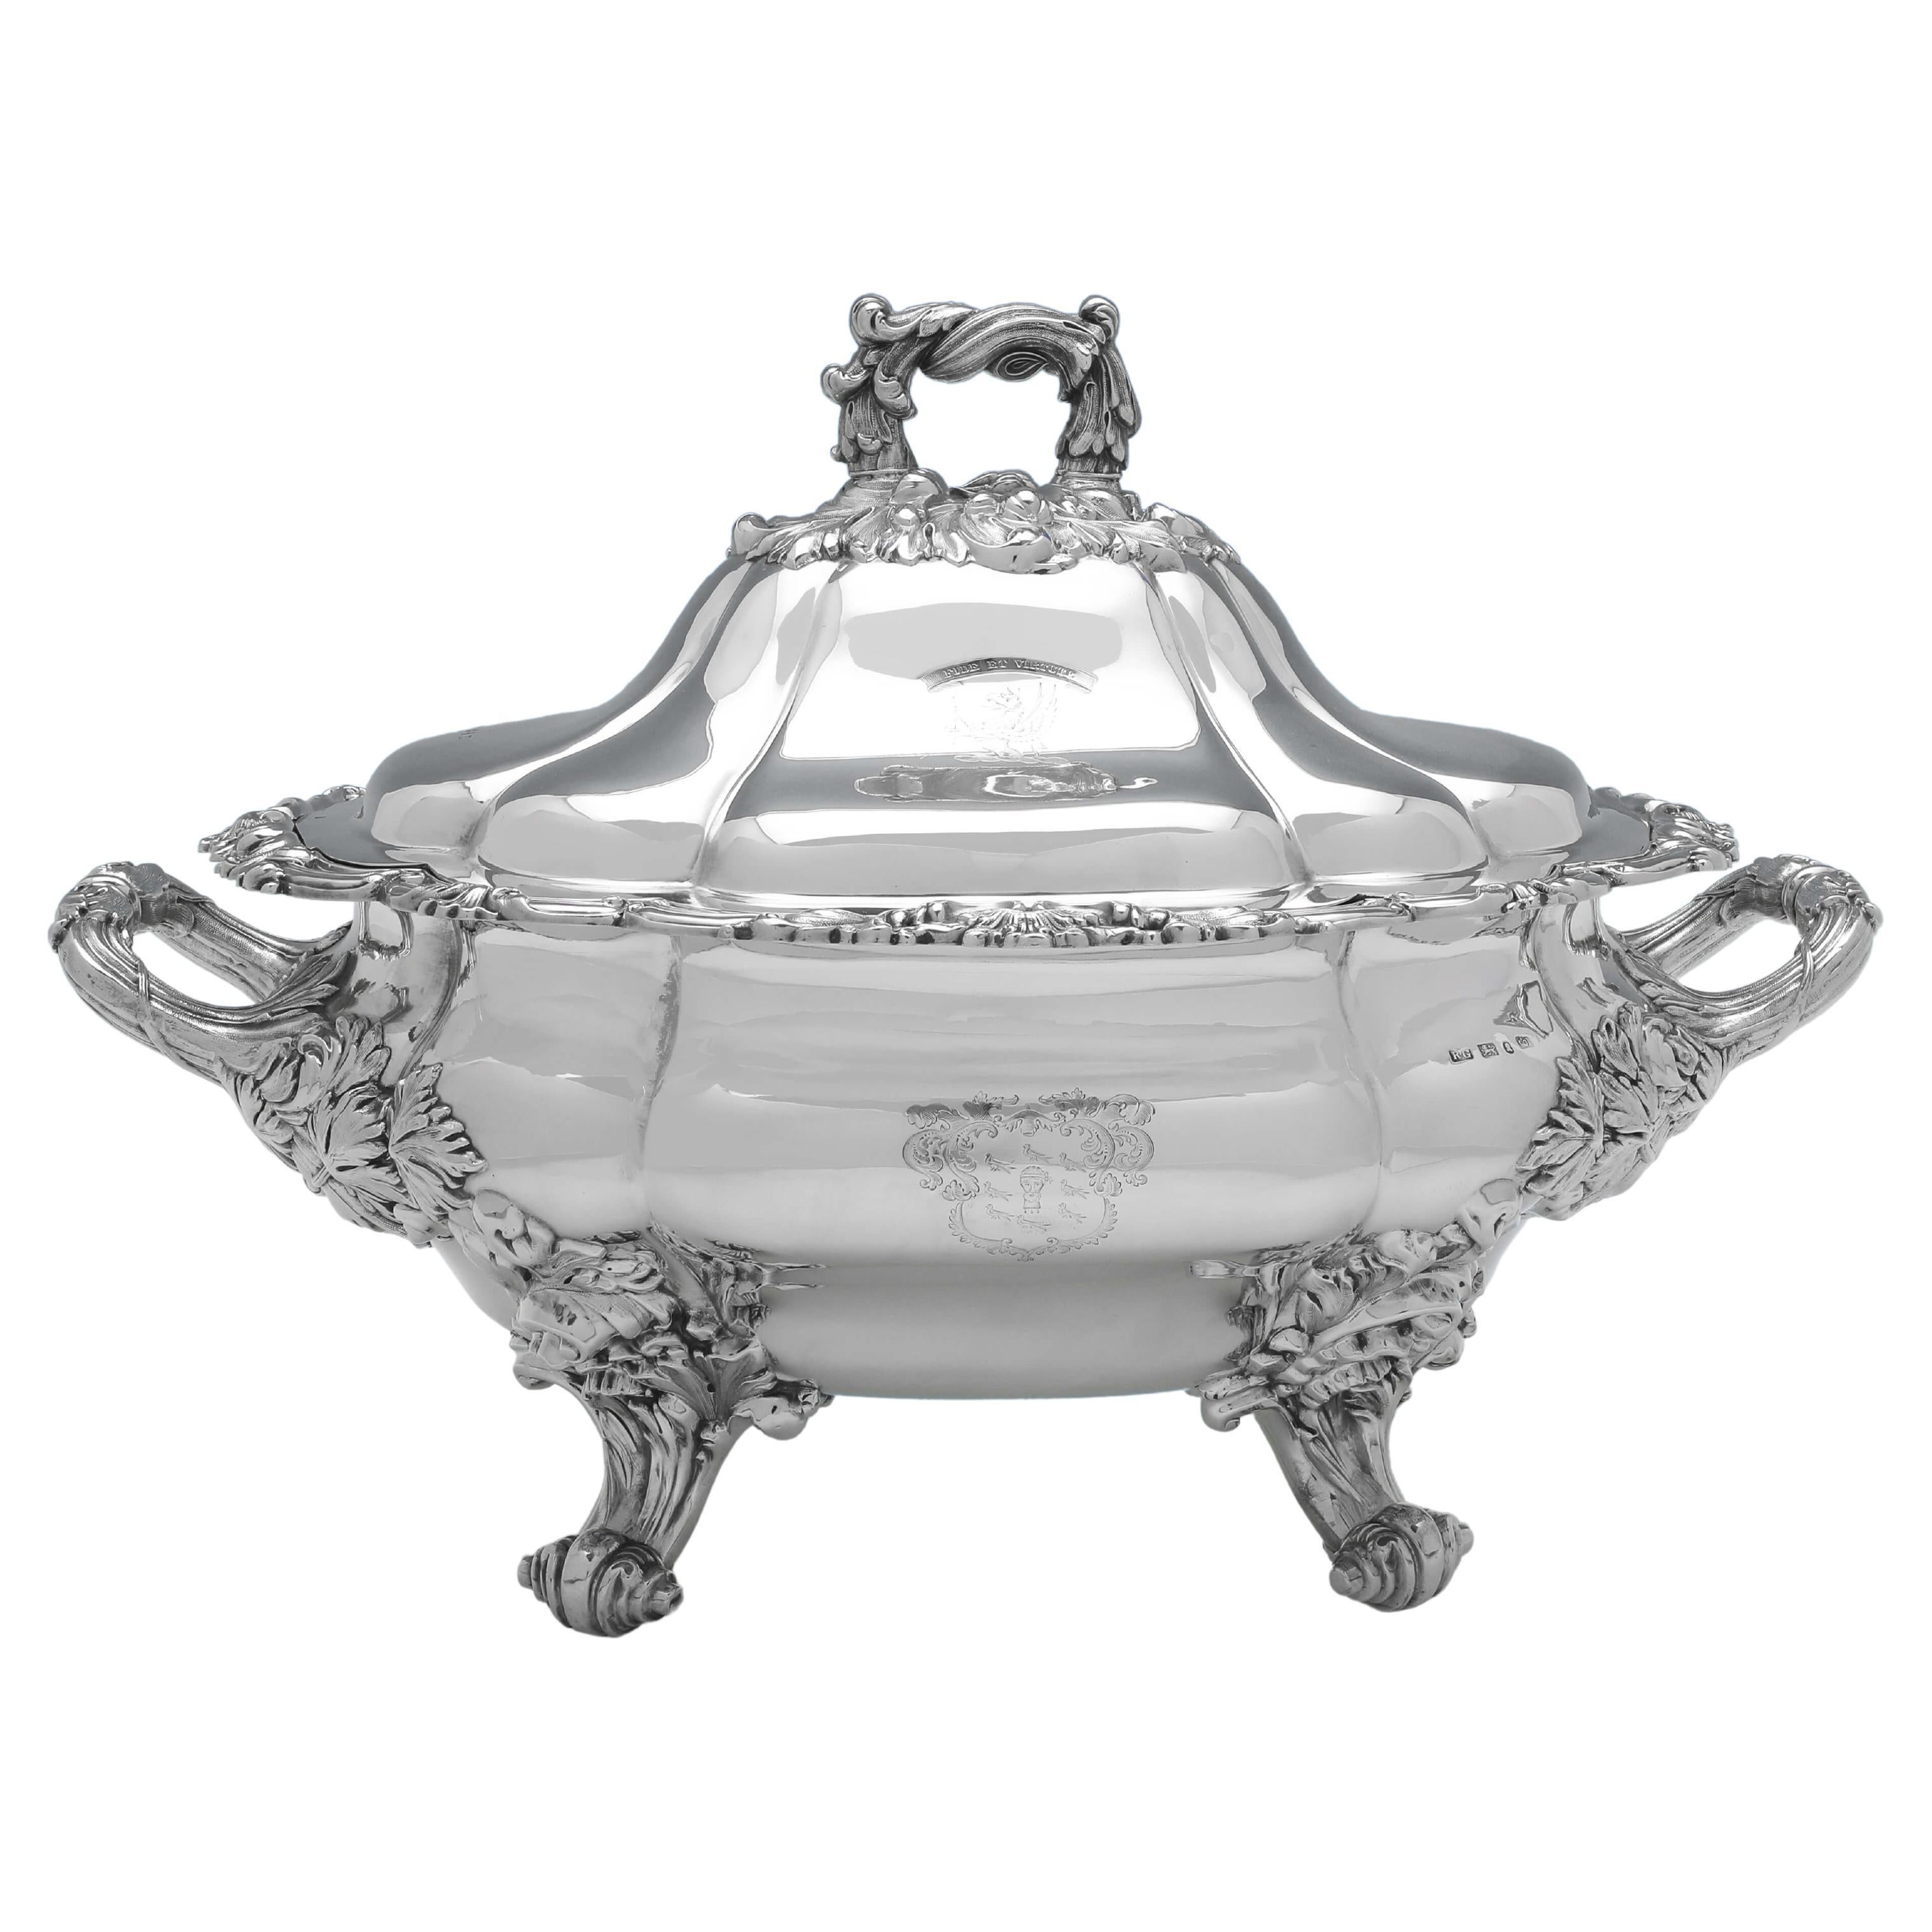 Thomas Gladstone Tureen, Sheffield 1833 by Robert Gainsford For Sale